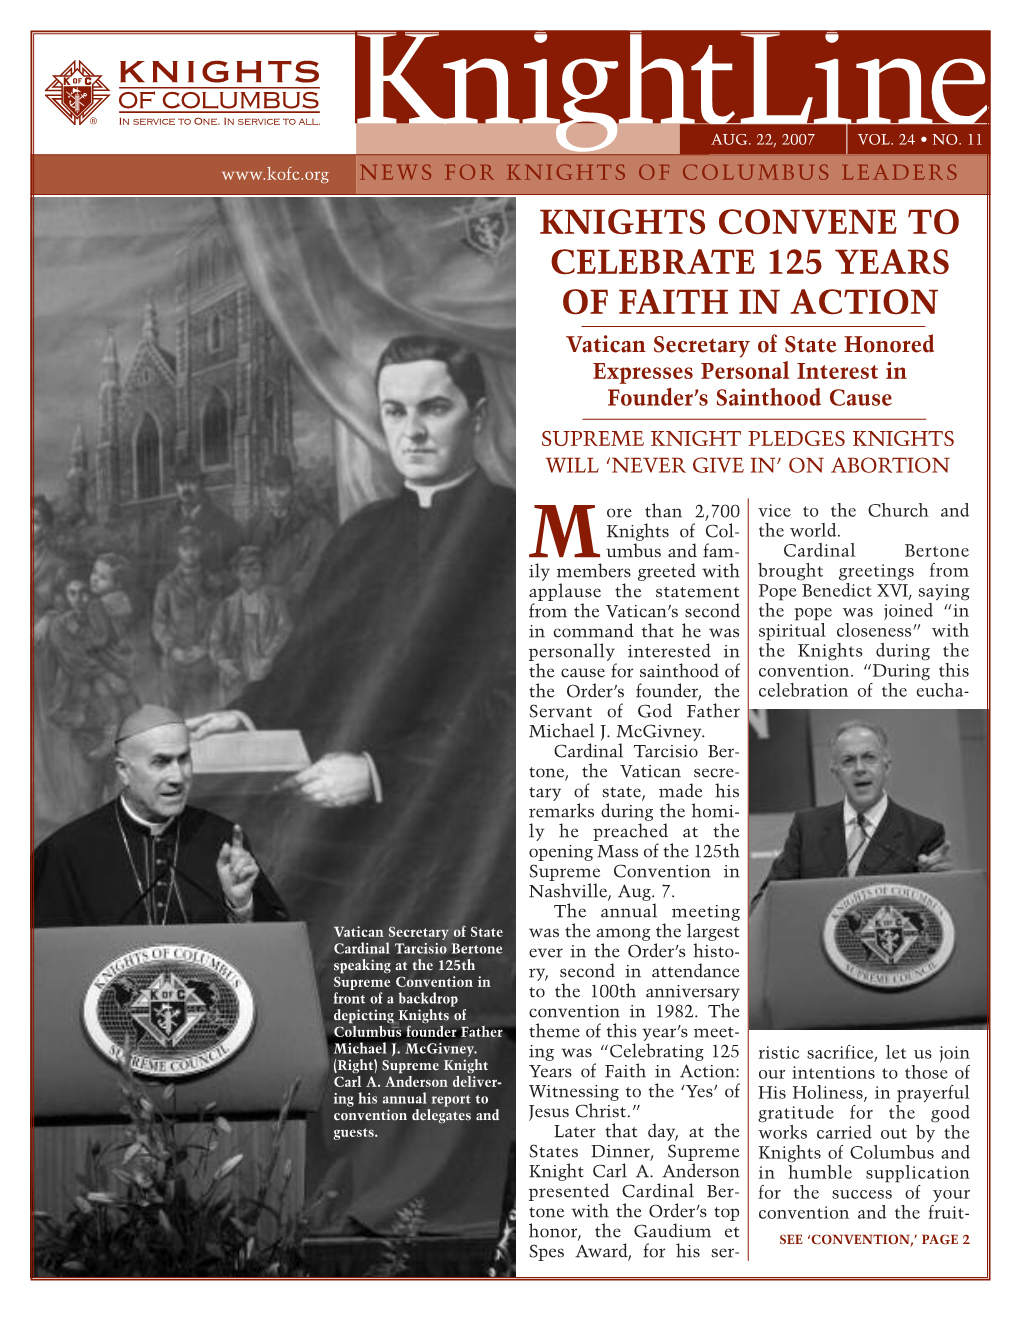 Knights Convene to Celebrate 125 Years of Faith in Action